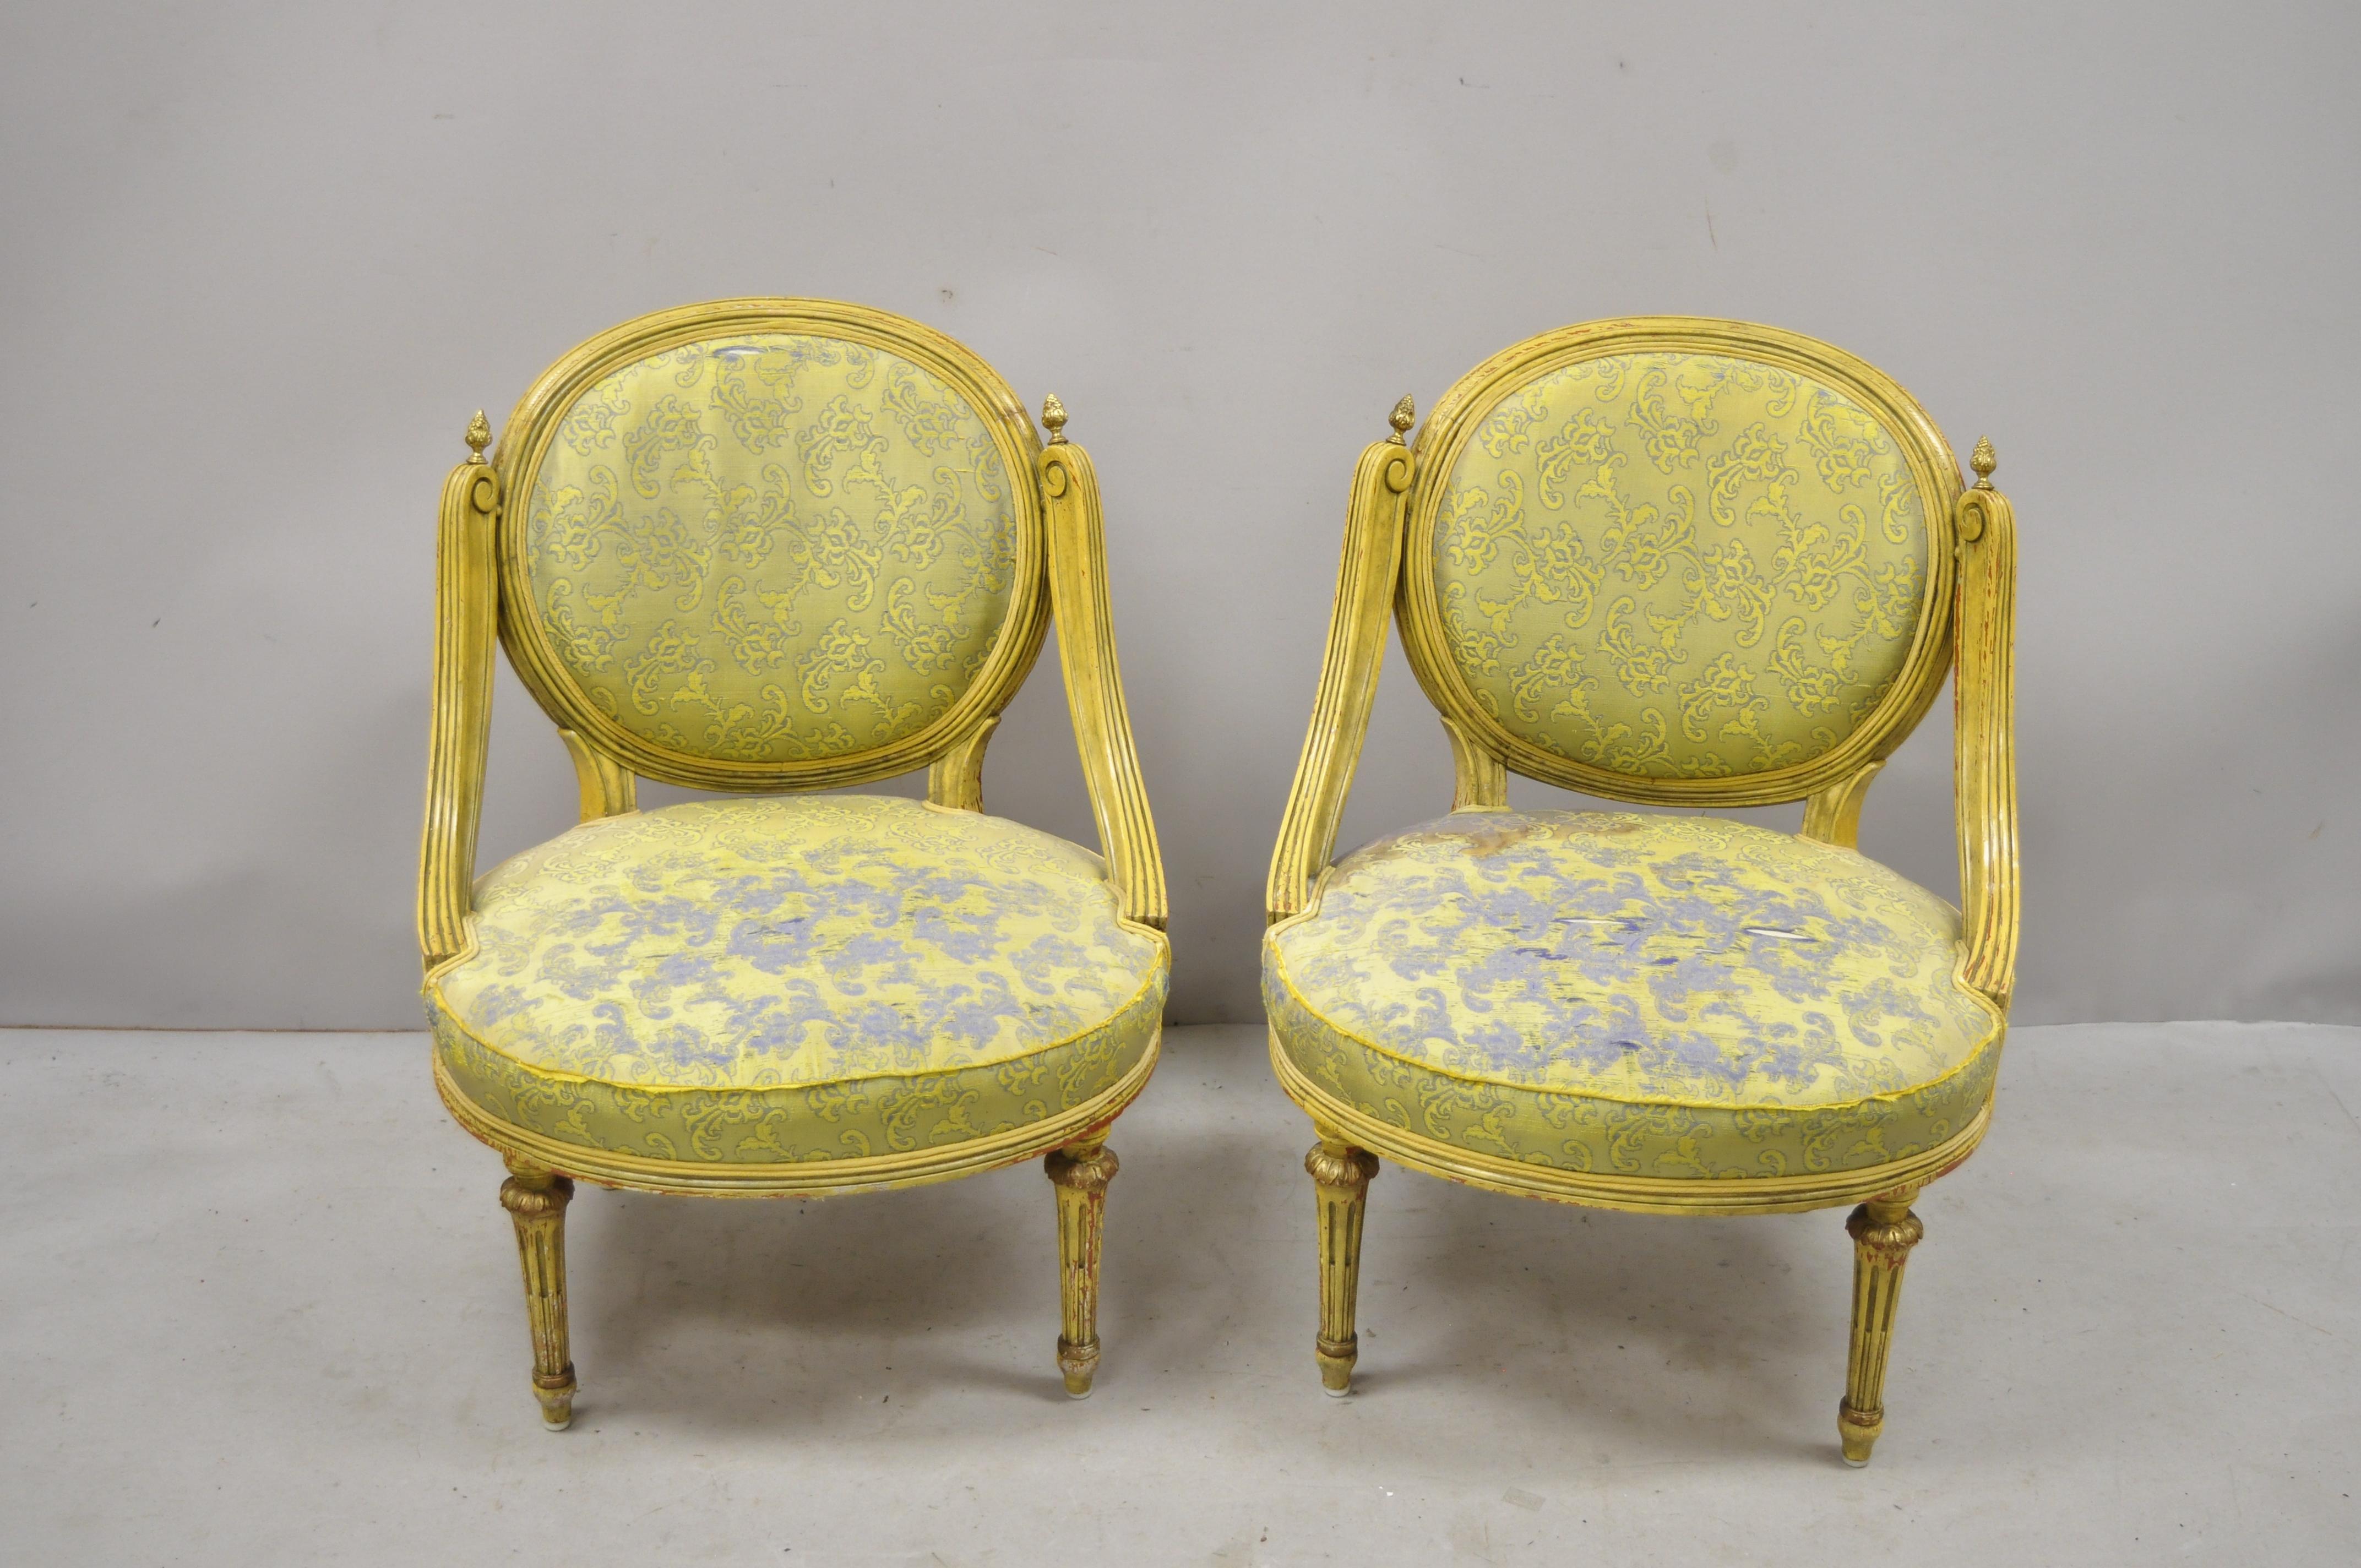 Pair of vintage French Louis XVI style low Petite Boudoir small Hiprest chairs. Item features low profile frames, brass finials, tapered legs, great style and form, circa early 20th century. Measurements: 30.5